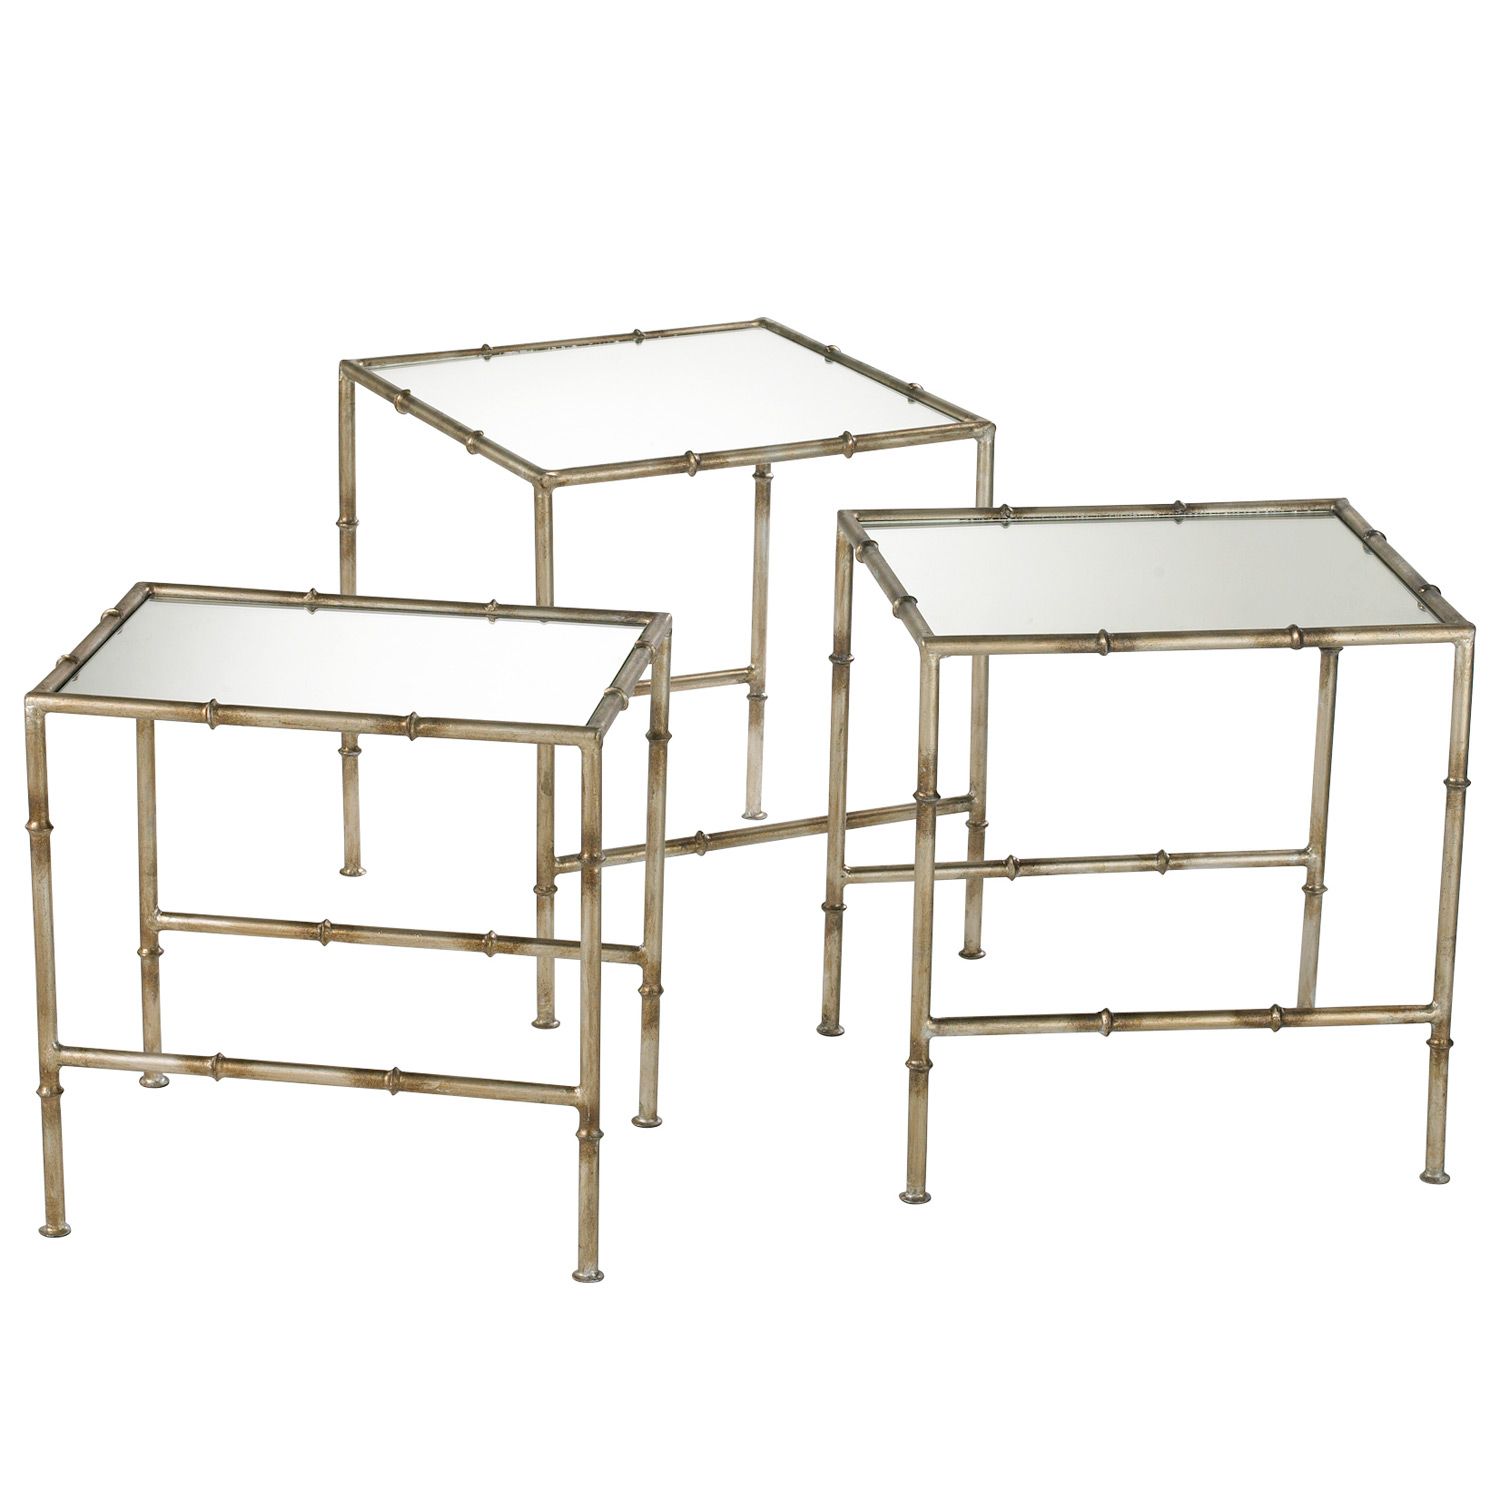 pin jamie liebert searching for end tables pottery barn accent table three glass top iron nesting with bronze finish product small medium and large tableconstruction material